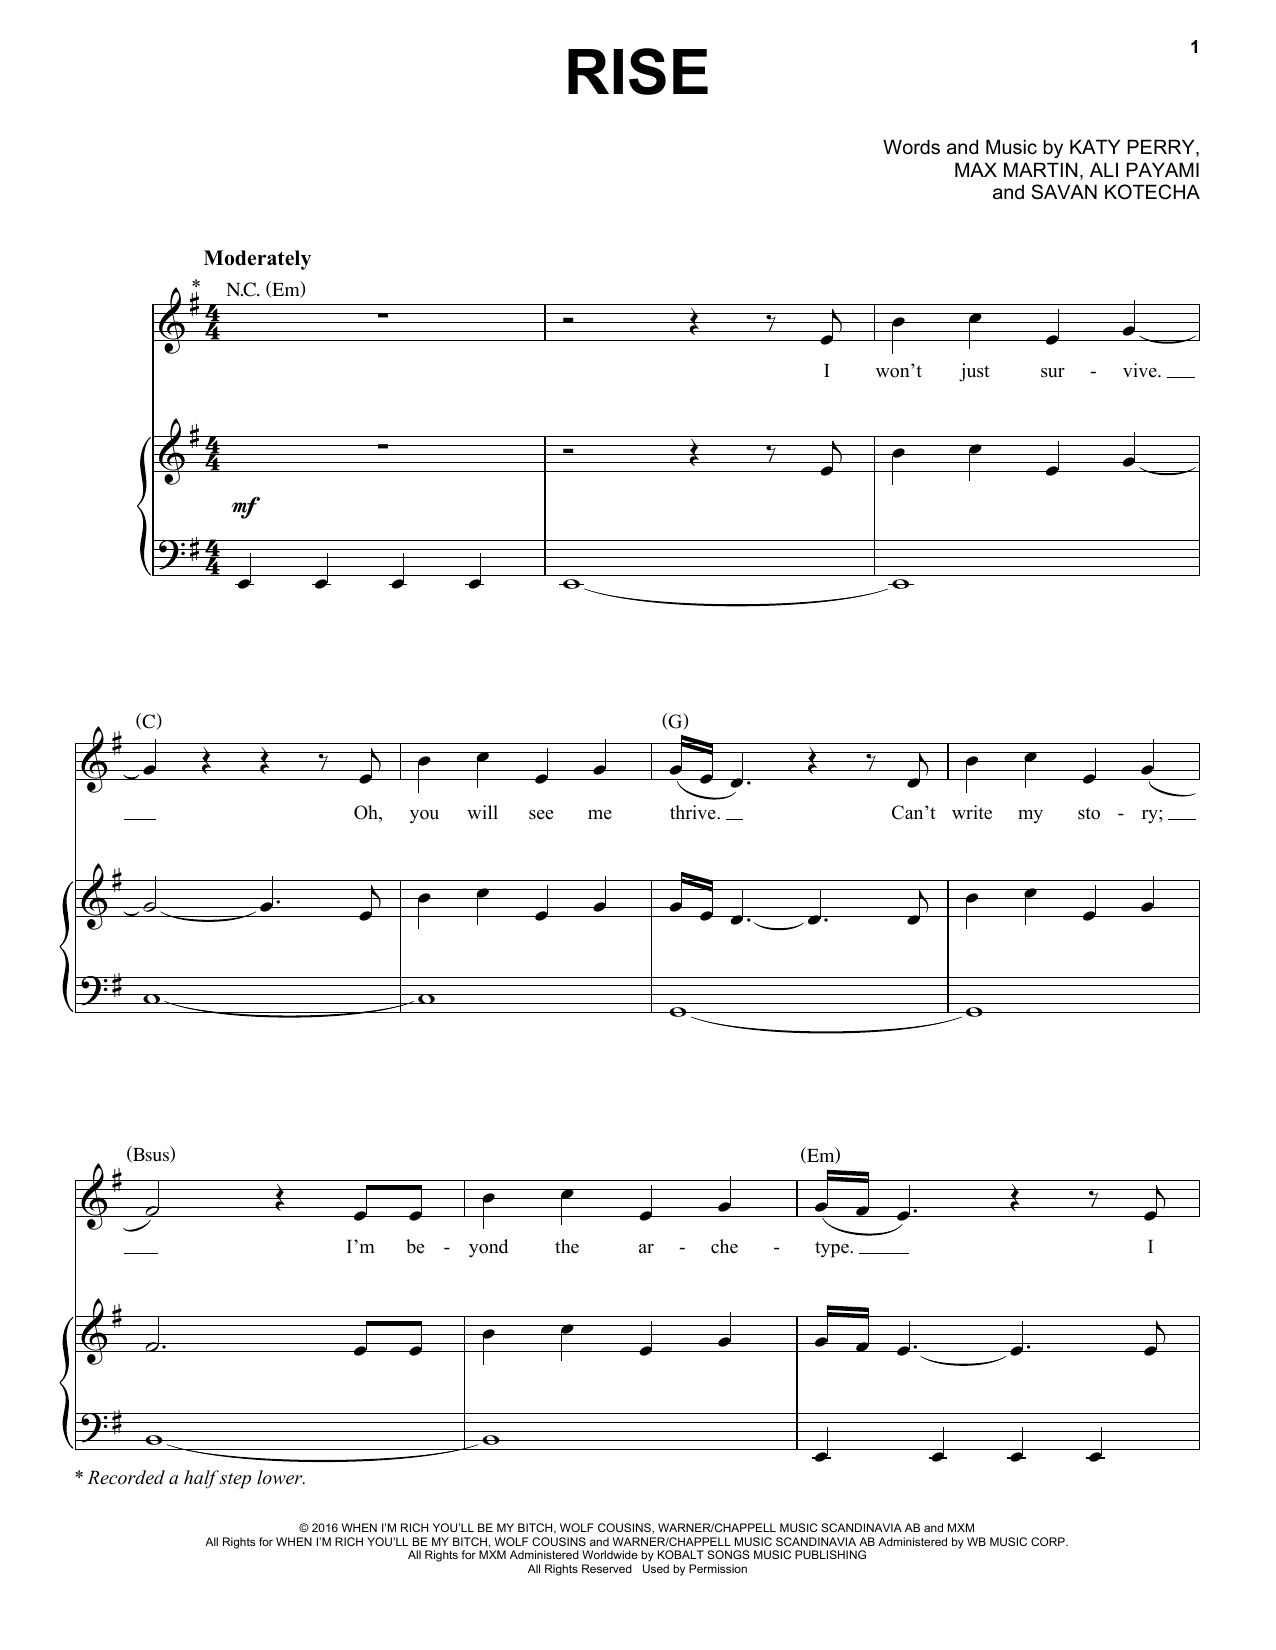 Katy Perry Rise sheet music notes and chords. Download Printable PDF.